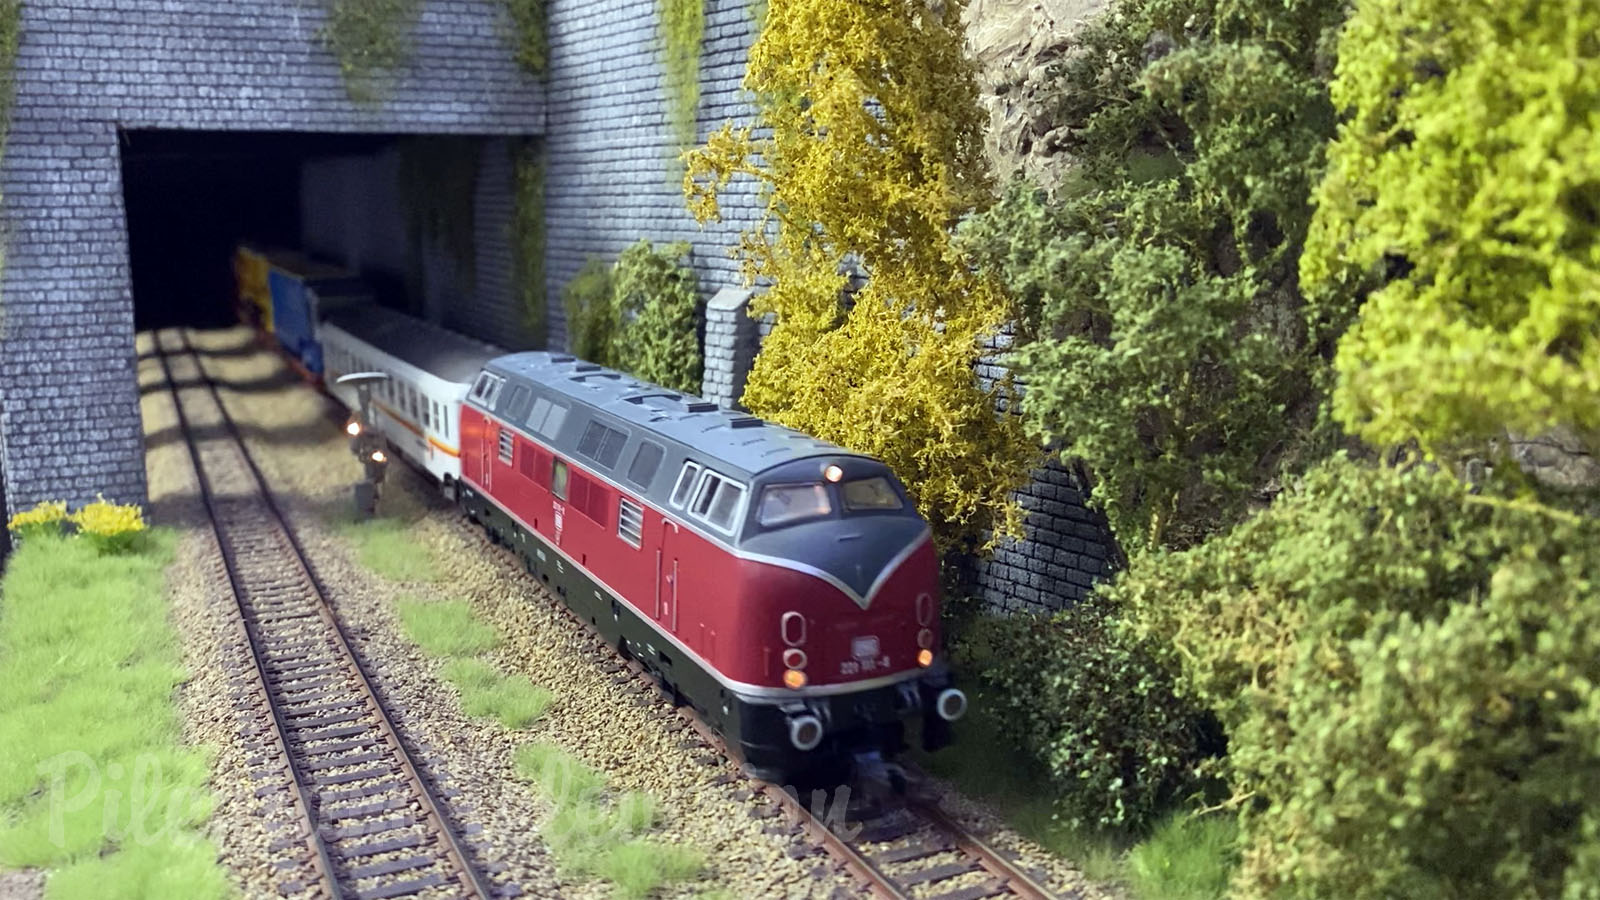 Model Trains and Faller Cars - Enjoy Steam Locos and Diesel Locomotives - HO Scale Layout